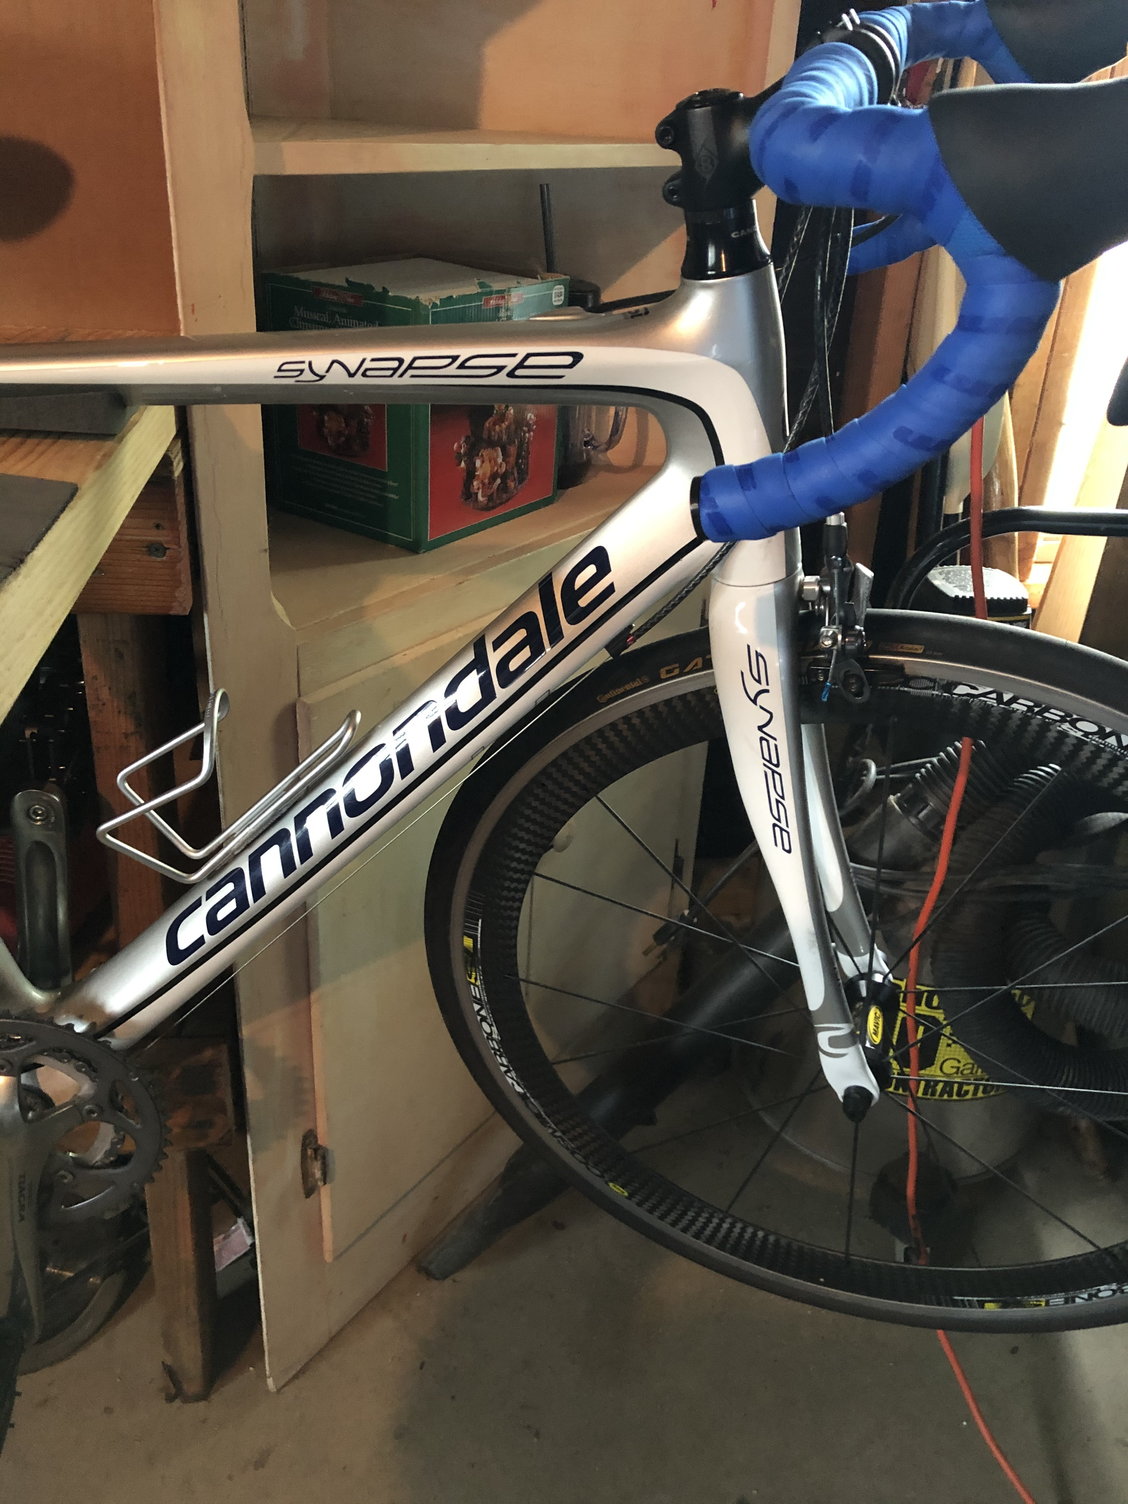 cannondale serial number